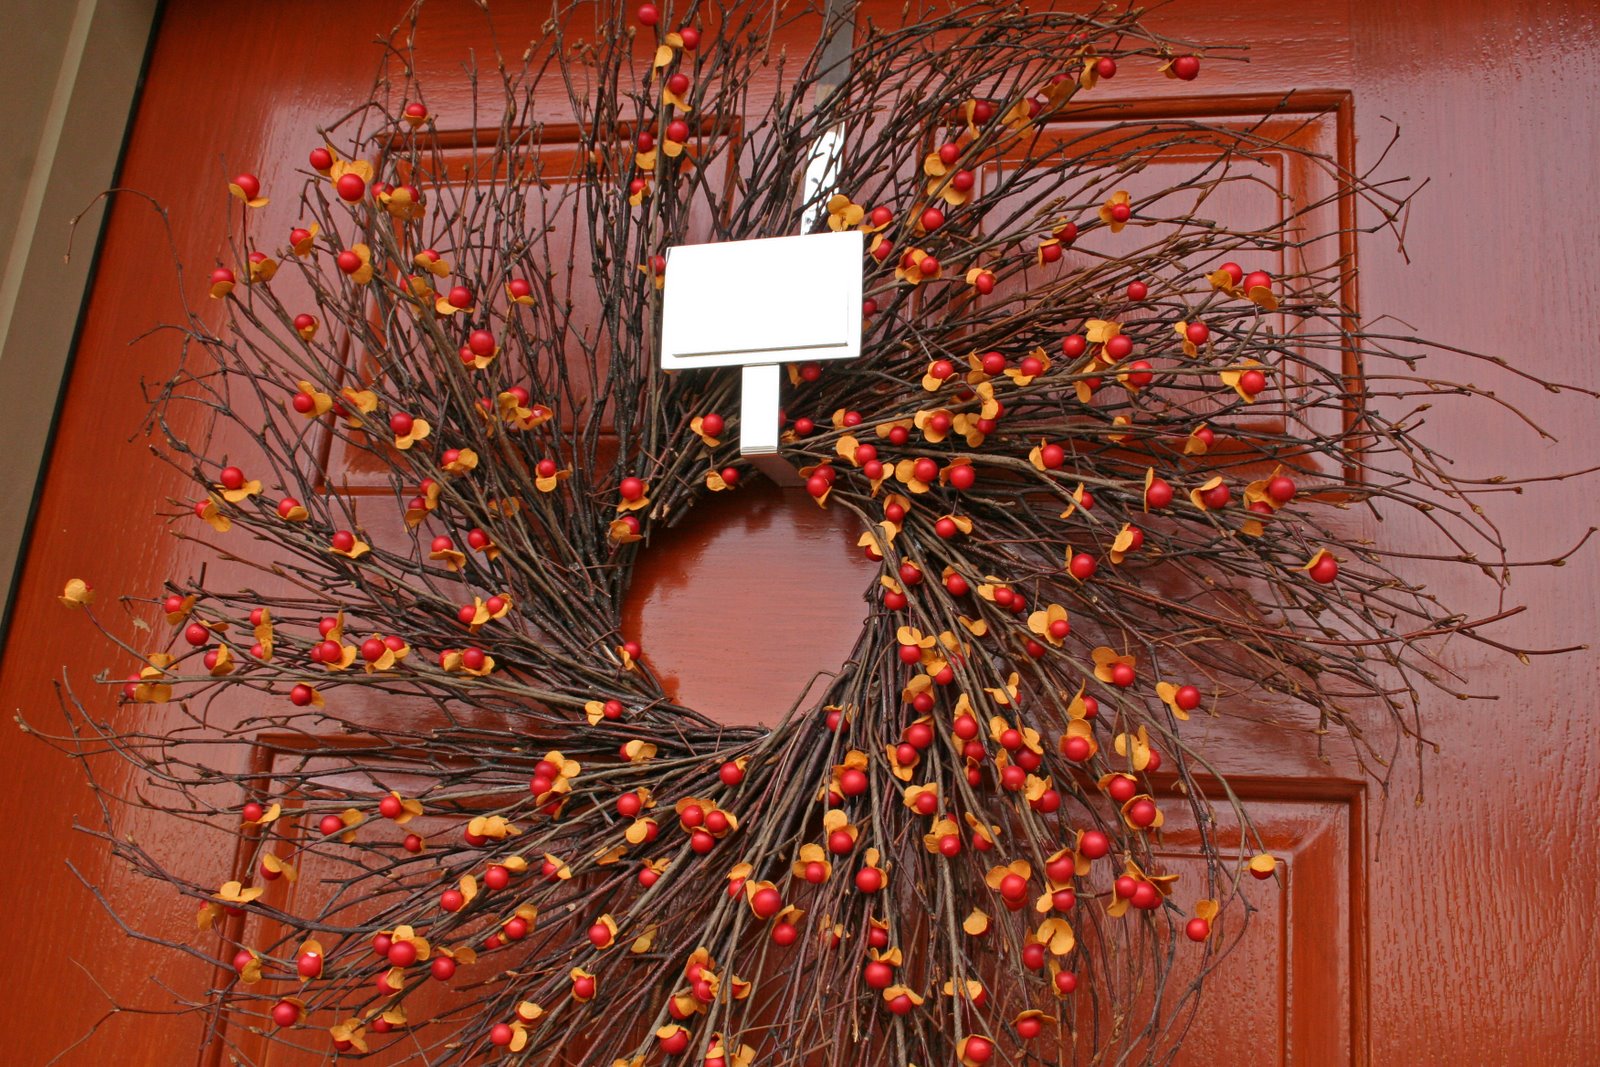 [new+door+and+wreath+from+outside.jpg]